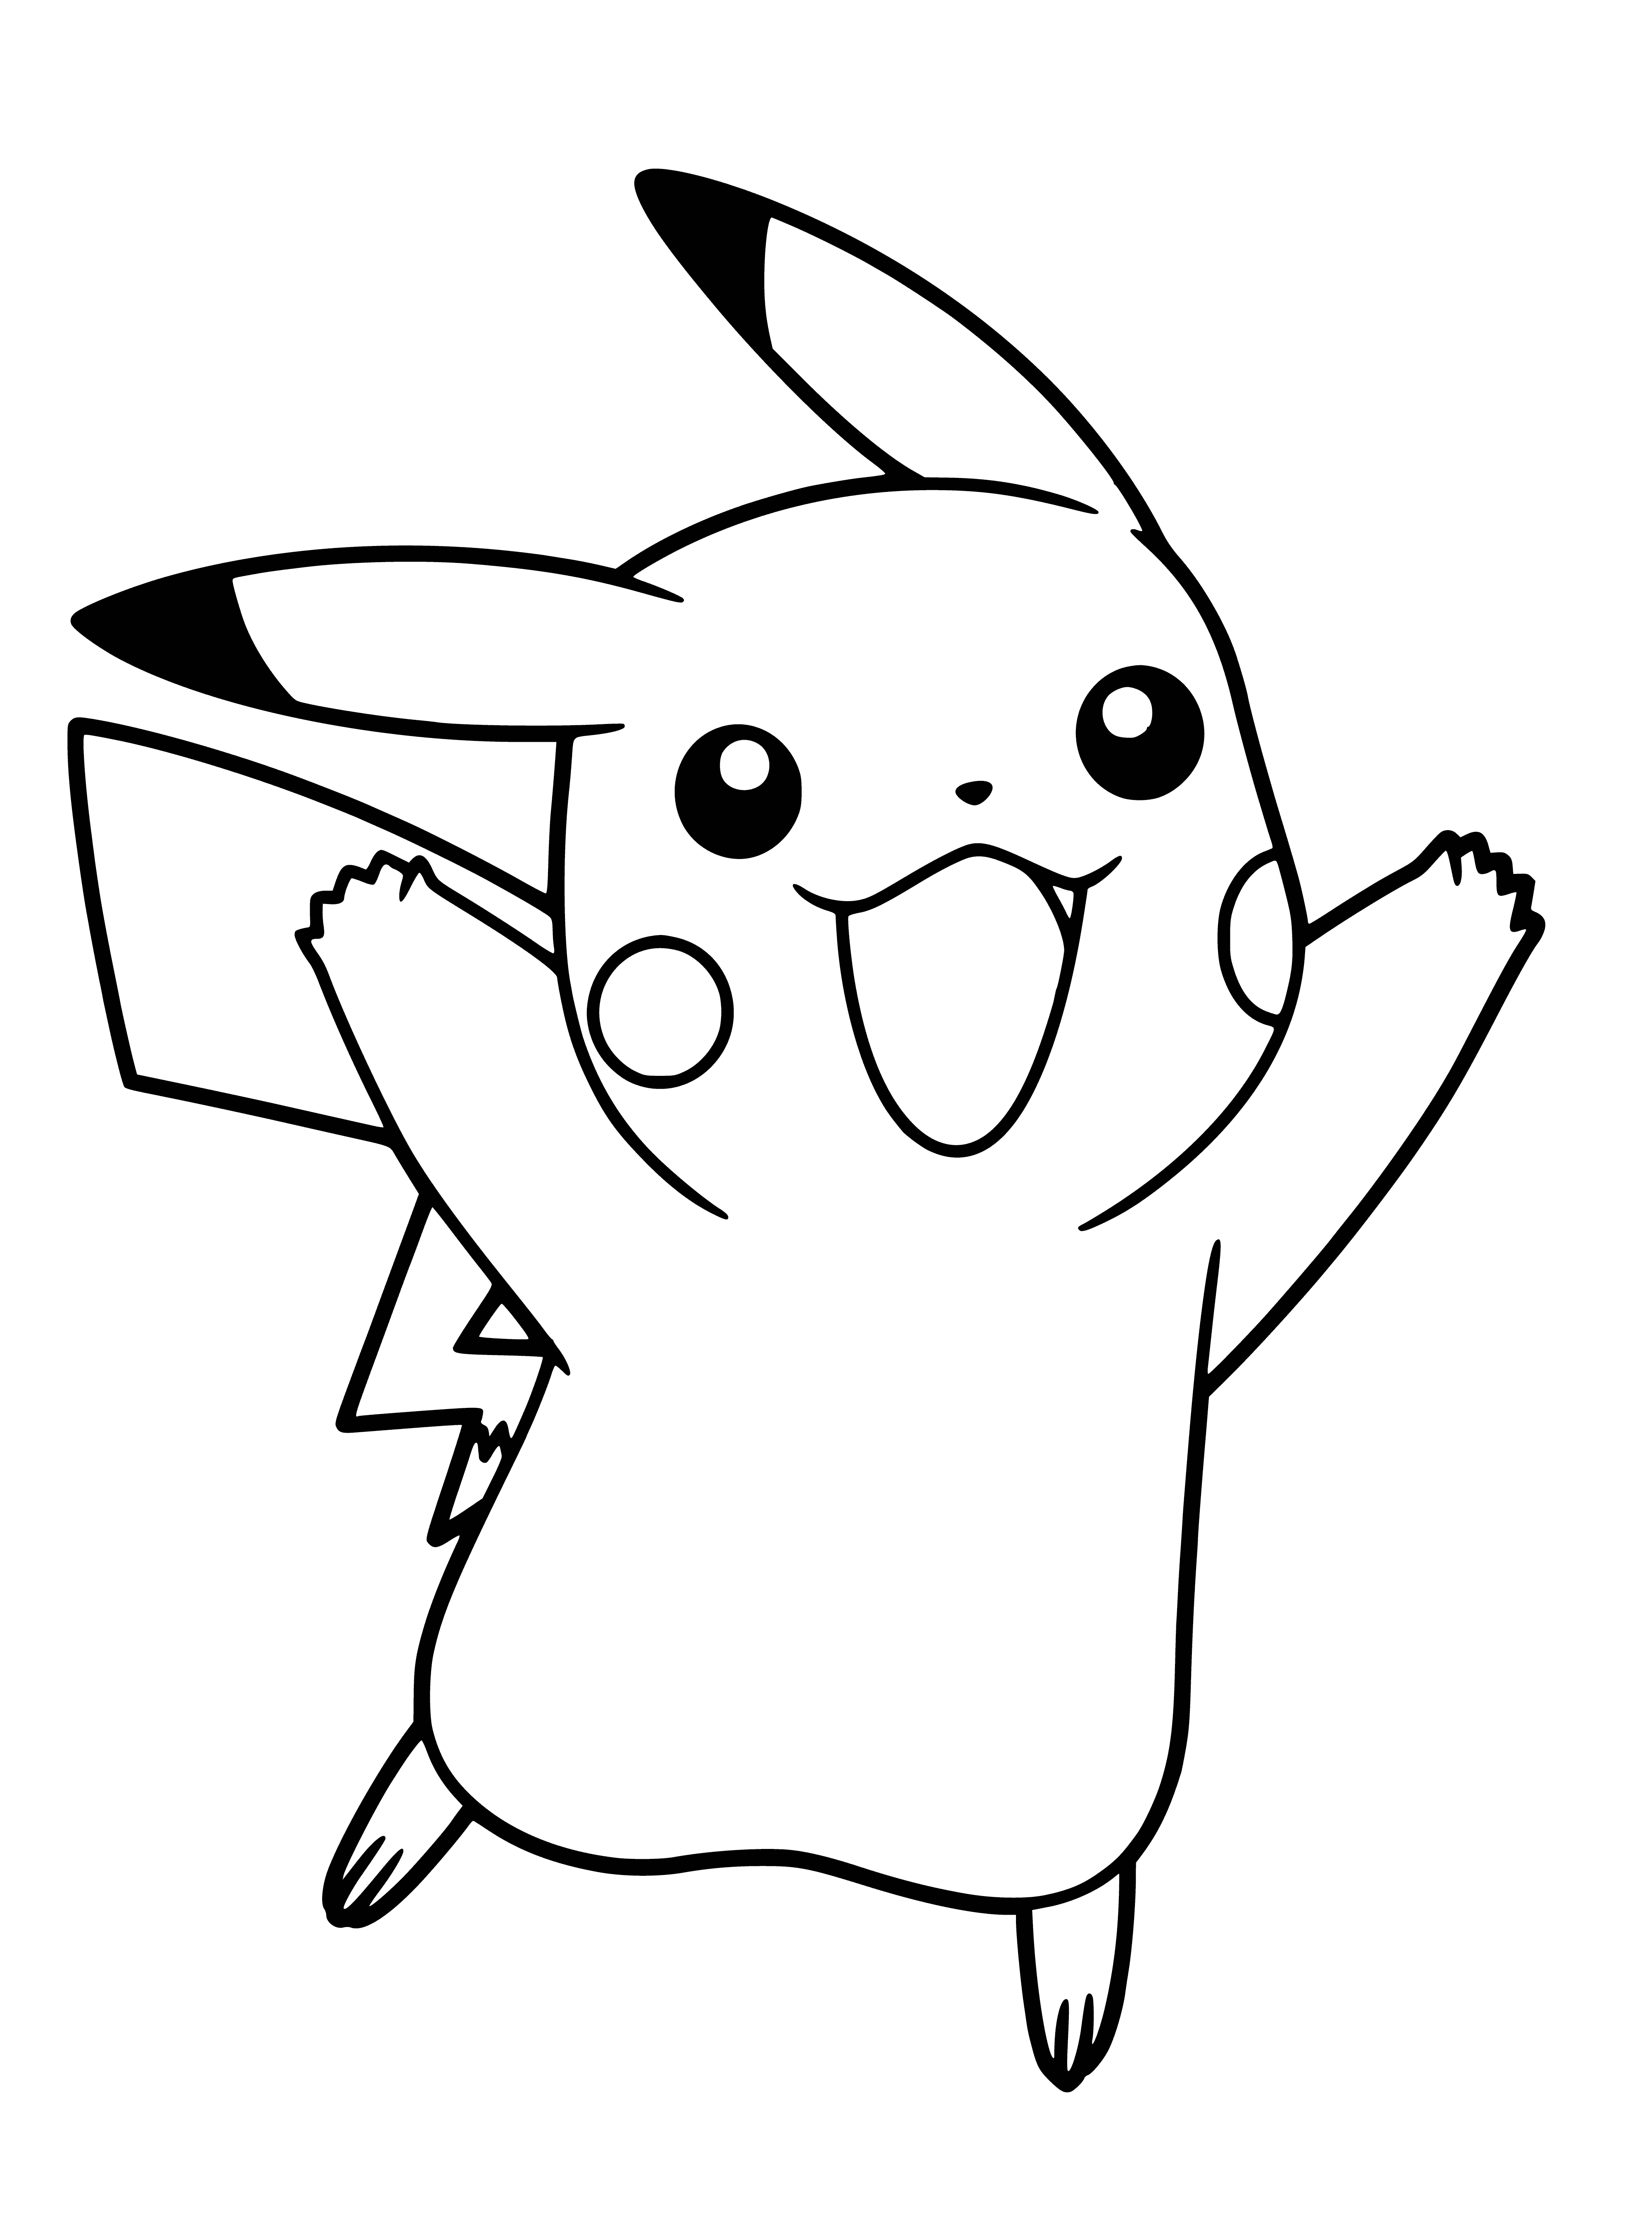 coloring page: Adorable yellow Pikachu with red cheeks, black eyes, and curled tail.